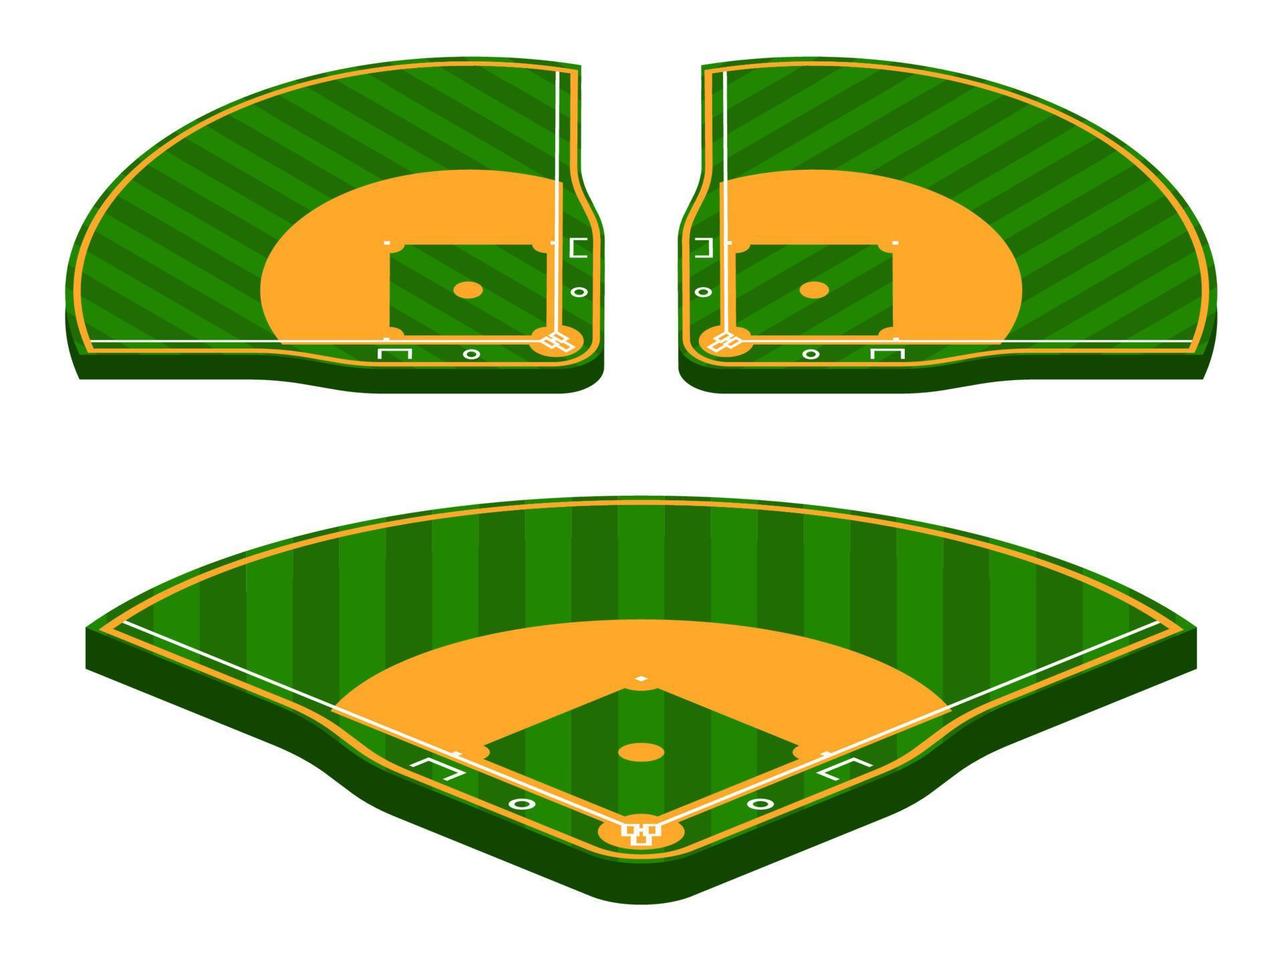 set of isometric green baseball fields with marking lines. Team sports. Active lifestyle. American national sport. Vector